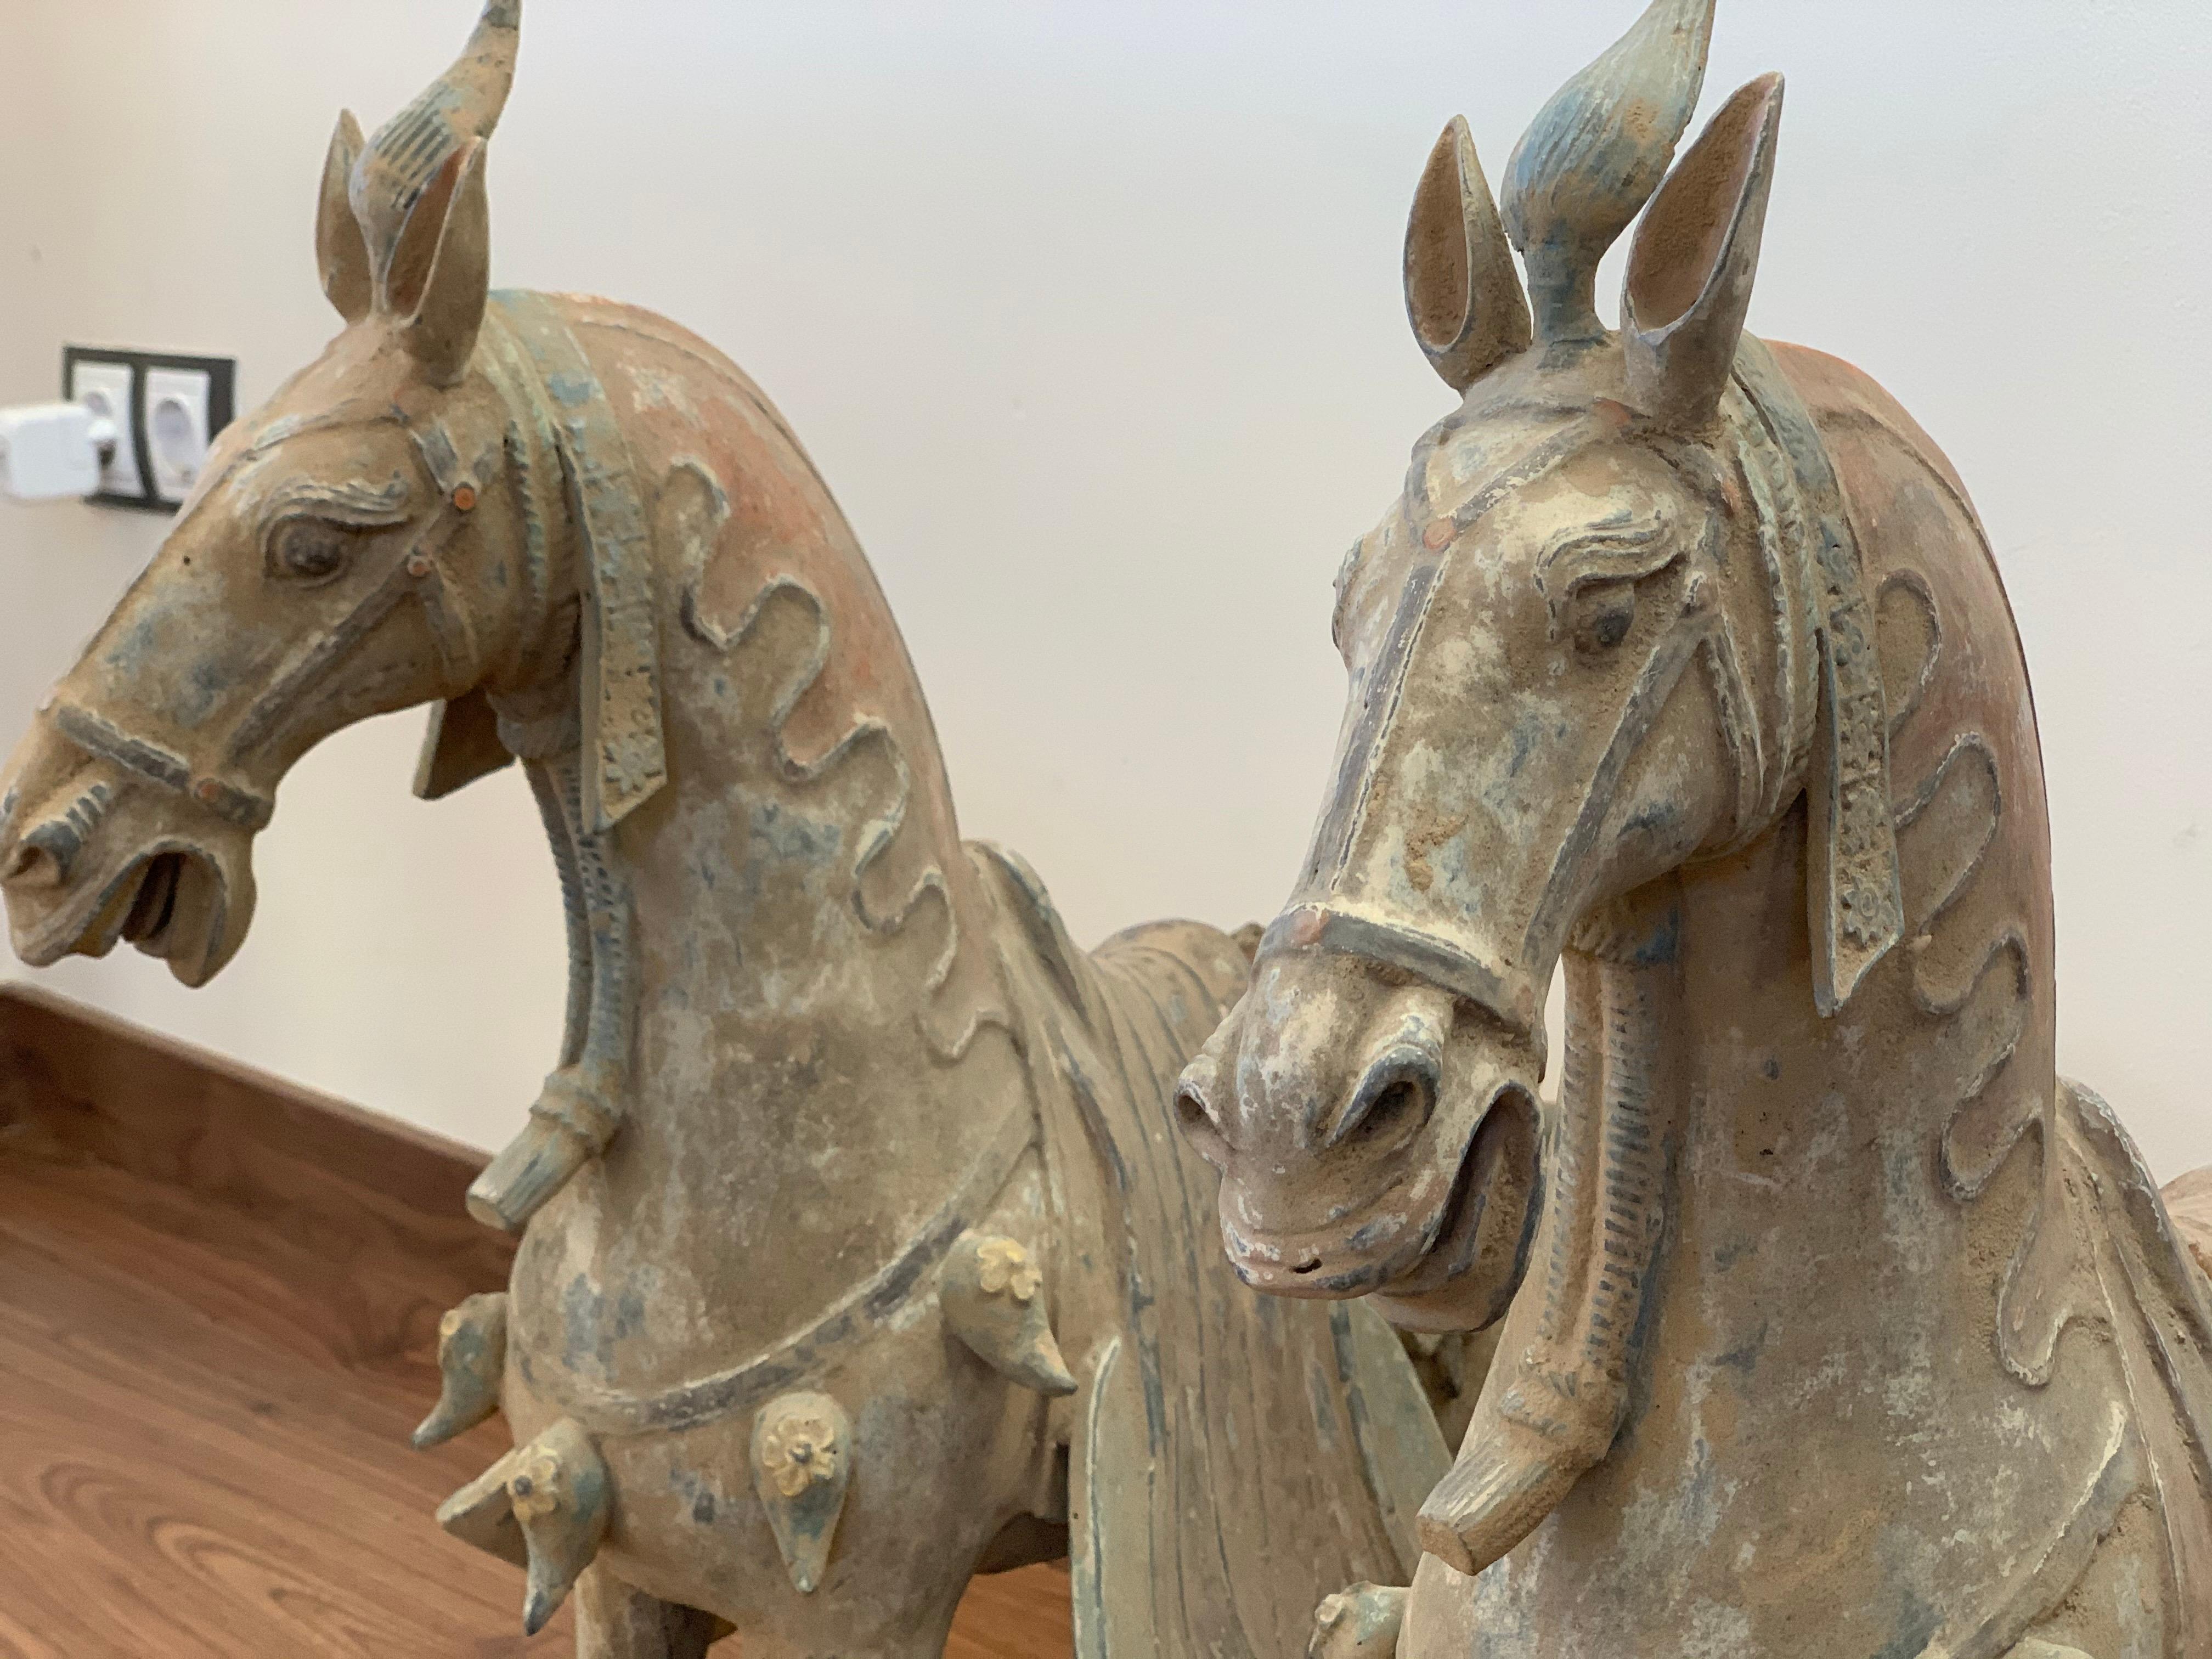  Northern Wei Dynasty Terracotta Horses, TL Tested,  '386 AD-535 AD' 3